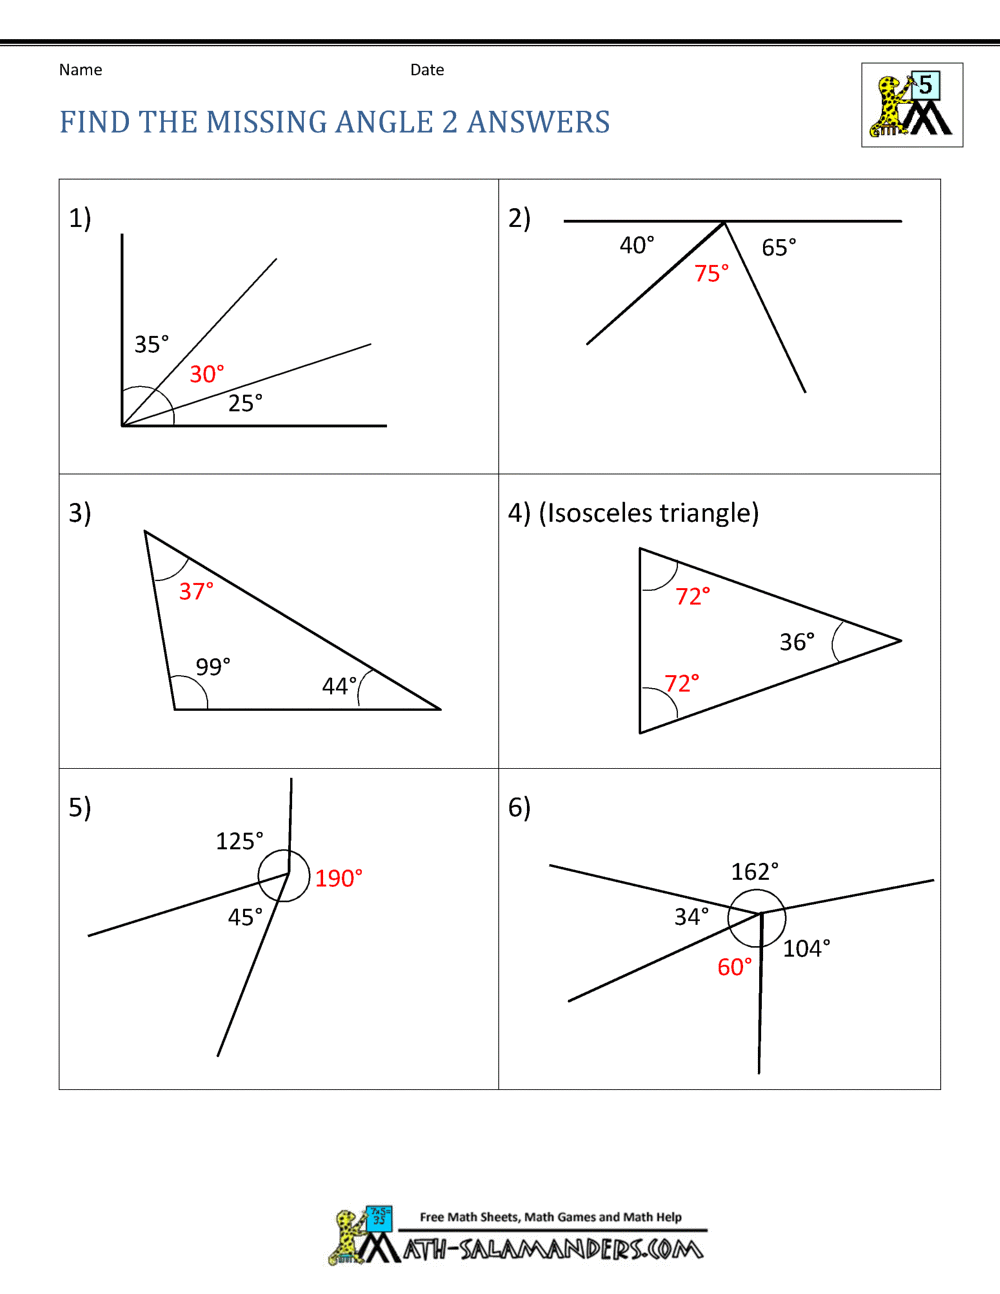 24th Grade Geometry With Find The Missing Angle Worksheet